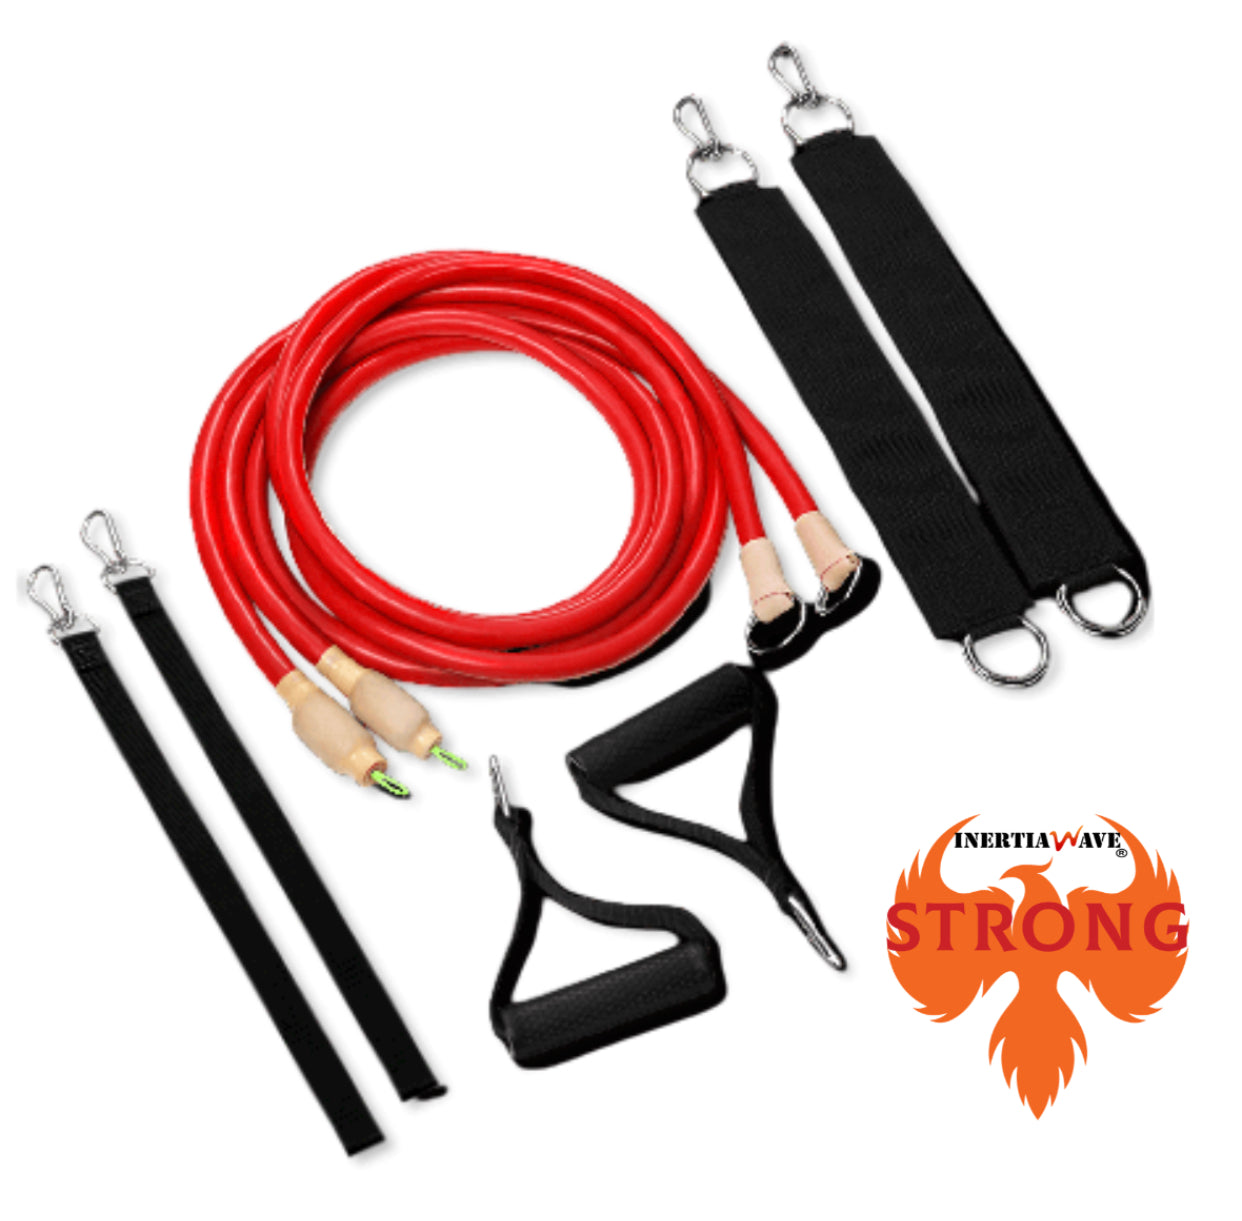 CHOOSE 2 Models & Colors- STRONG Pro Adds $39.00 to Cart.